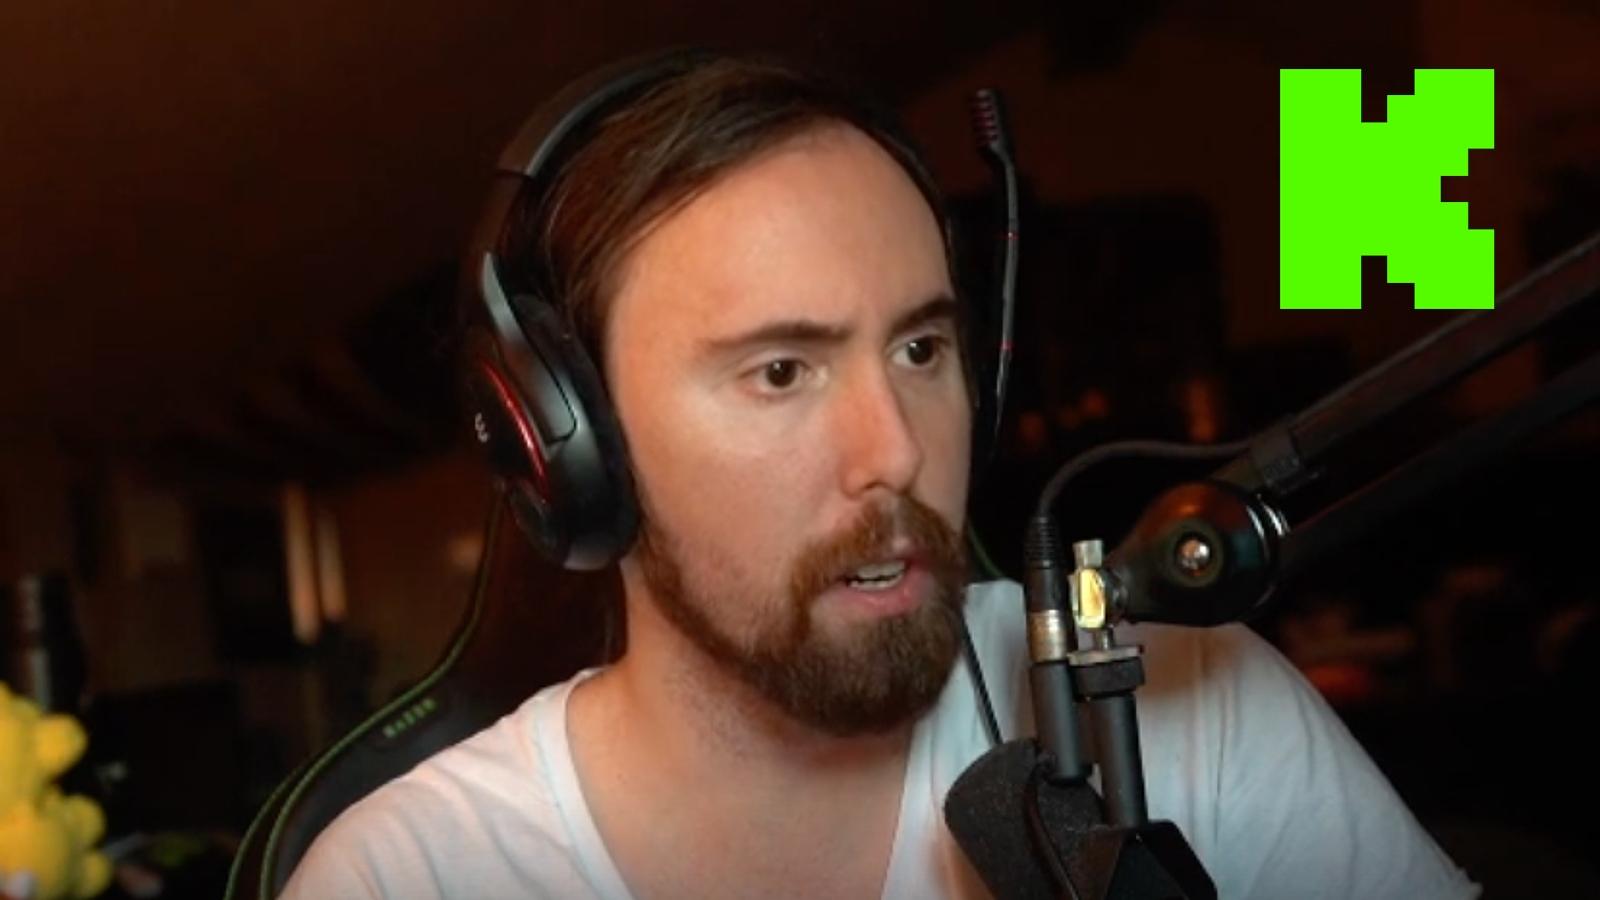 Asmongold in Twitch stream with Kick logo in corner